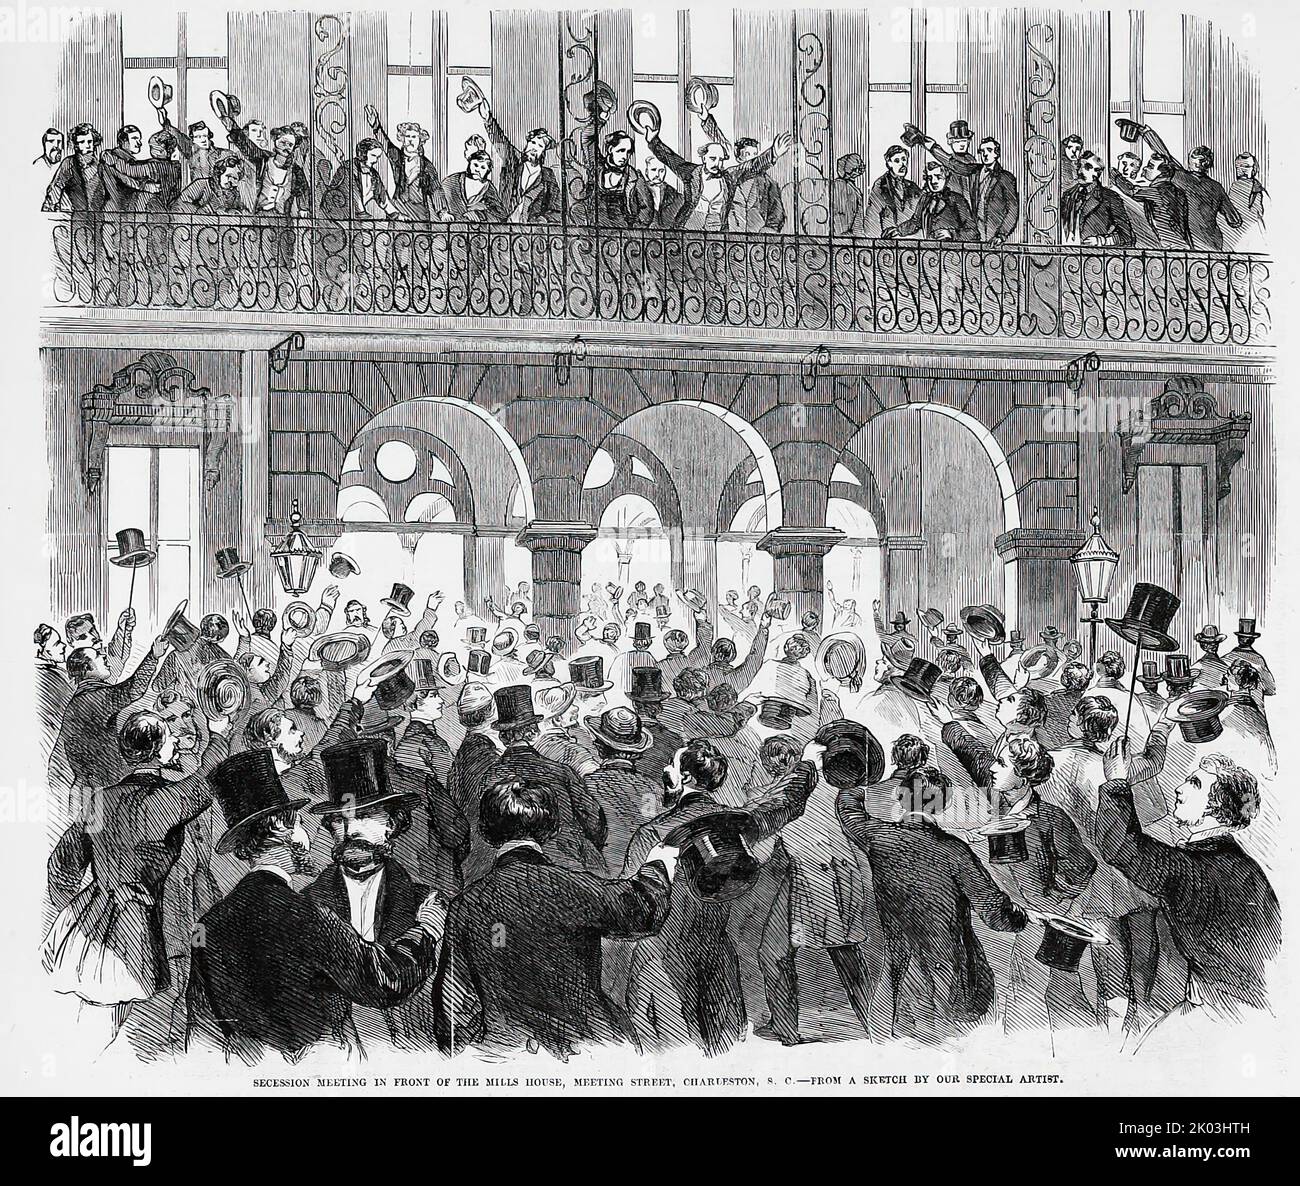 Secession meeting in front of the Mills House, Meeting Street, Charleston, South Carolina, November 1860. 19th century American Civil War illustration from Frank Leslie's Illustrated Newspaper Stock Photo